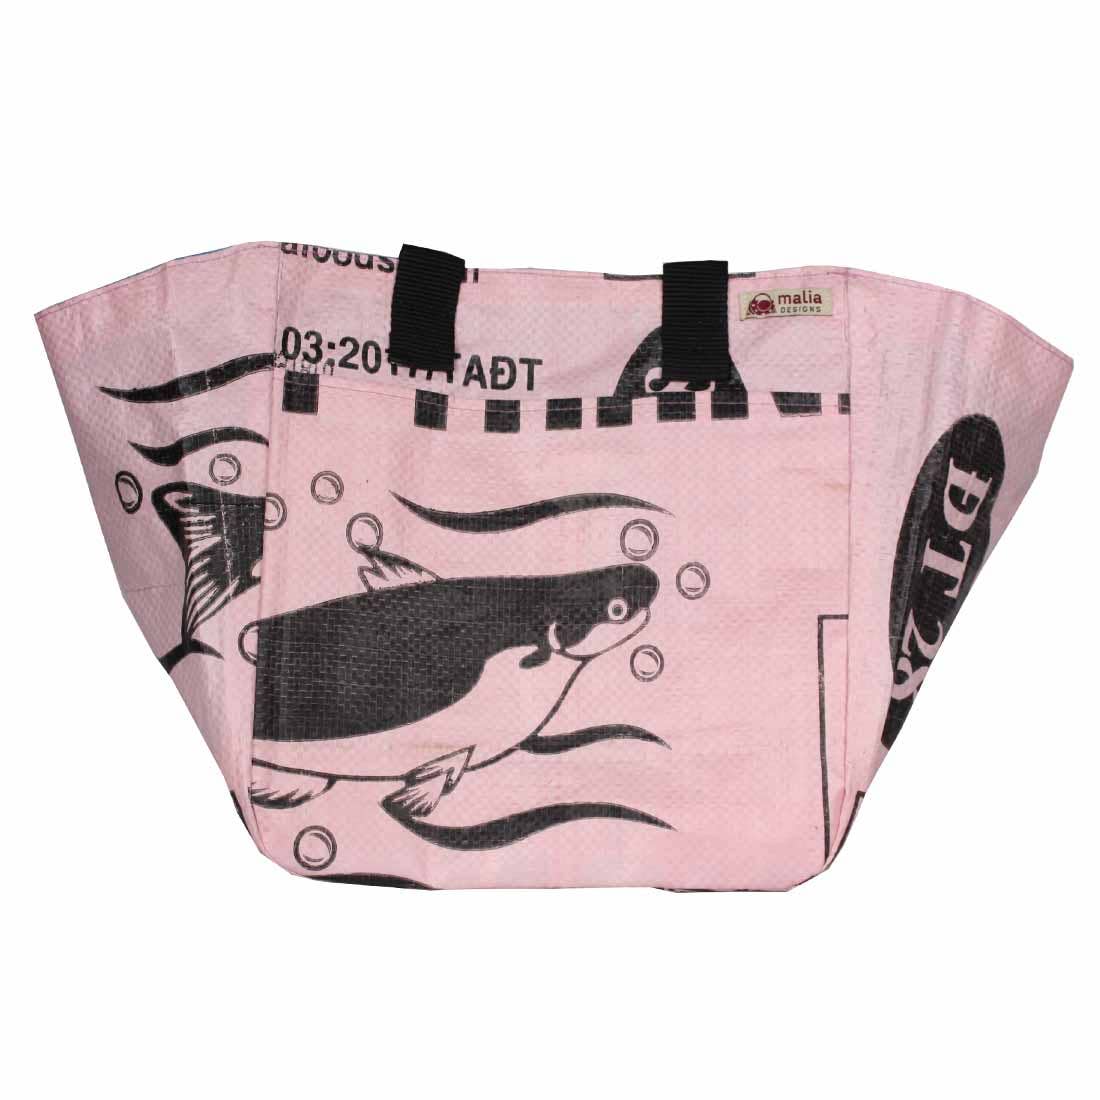 Recycled Feed Bag Market Tote